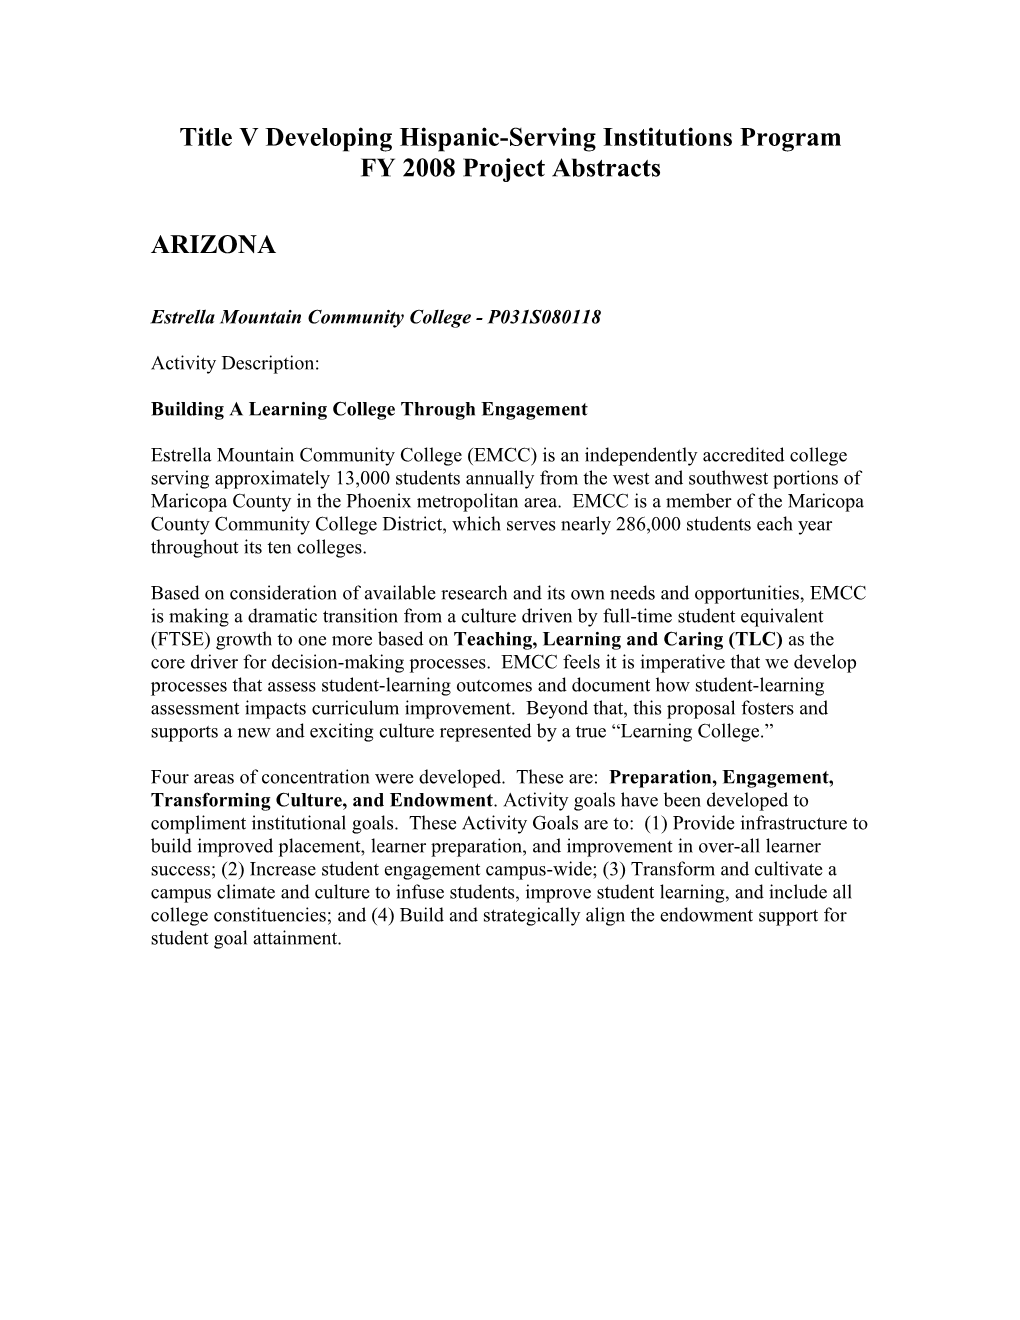 FY 2008 Project Abstracts for the Title V Developing Hispanic-Serving Institutions Program